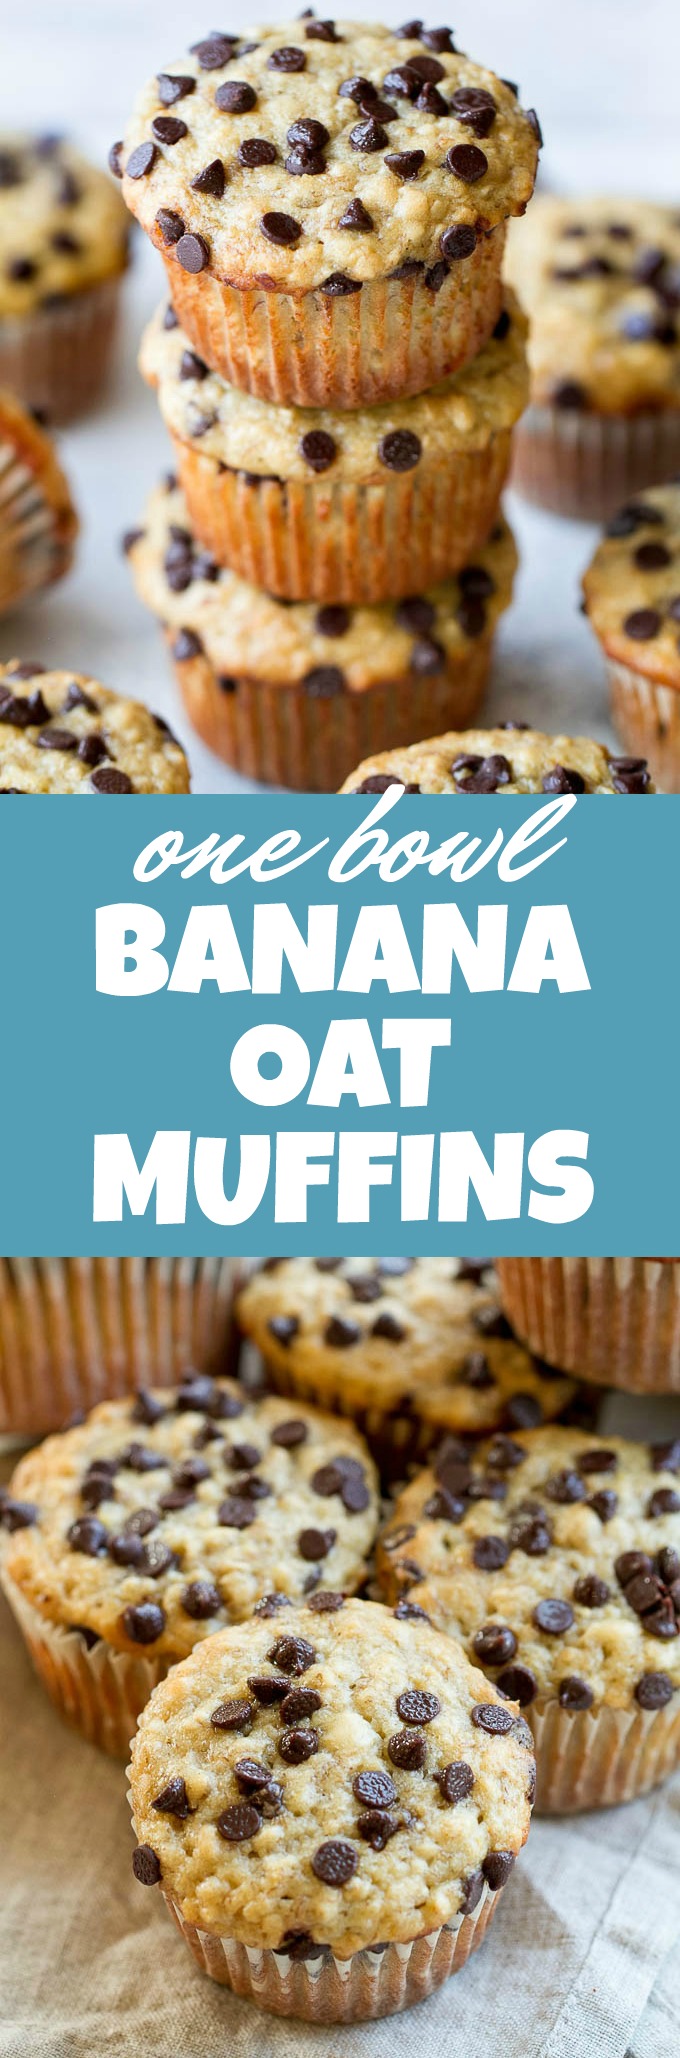 One Bowl Chocolate Chip Banana Oat Muffins - so soft and tender that you'd never guess they're made without butter or oil. Deliciously healthy and SUPER easy to whip up using just one bowl! | runningwithspoons.com